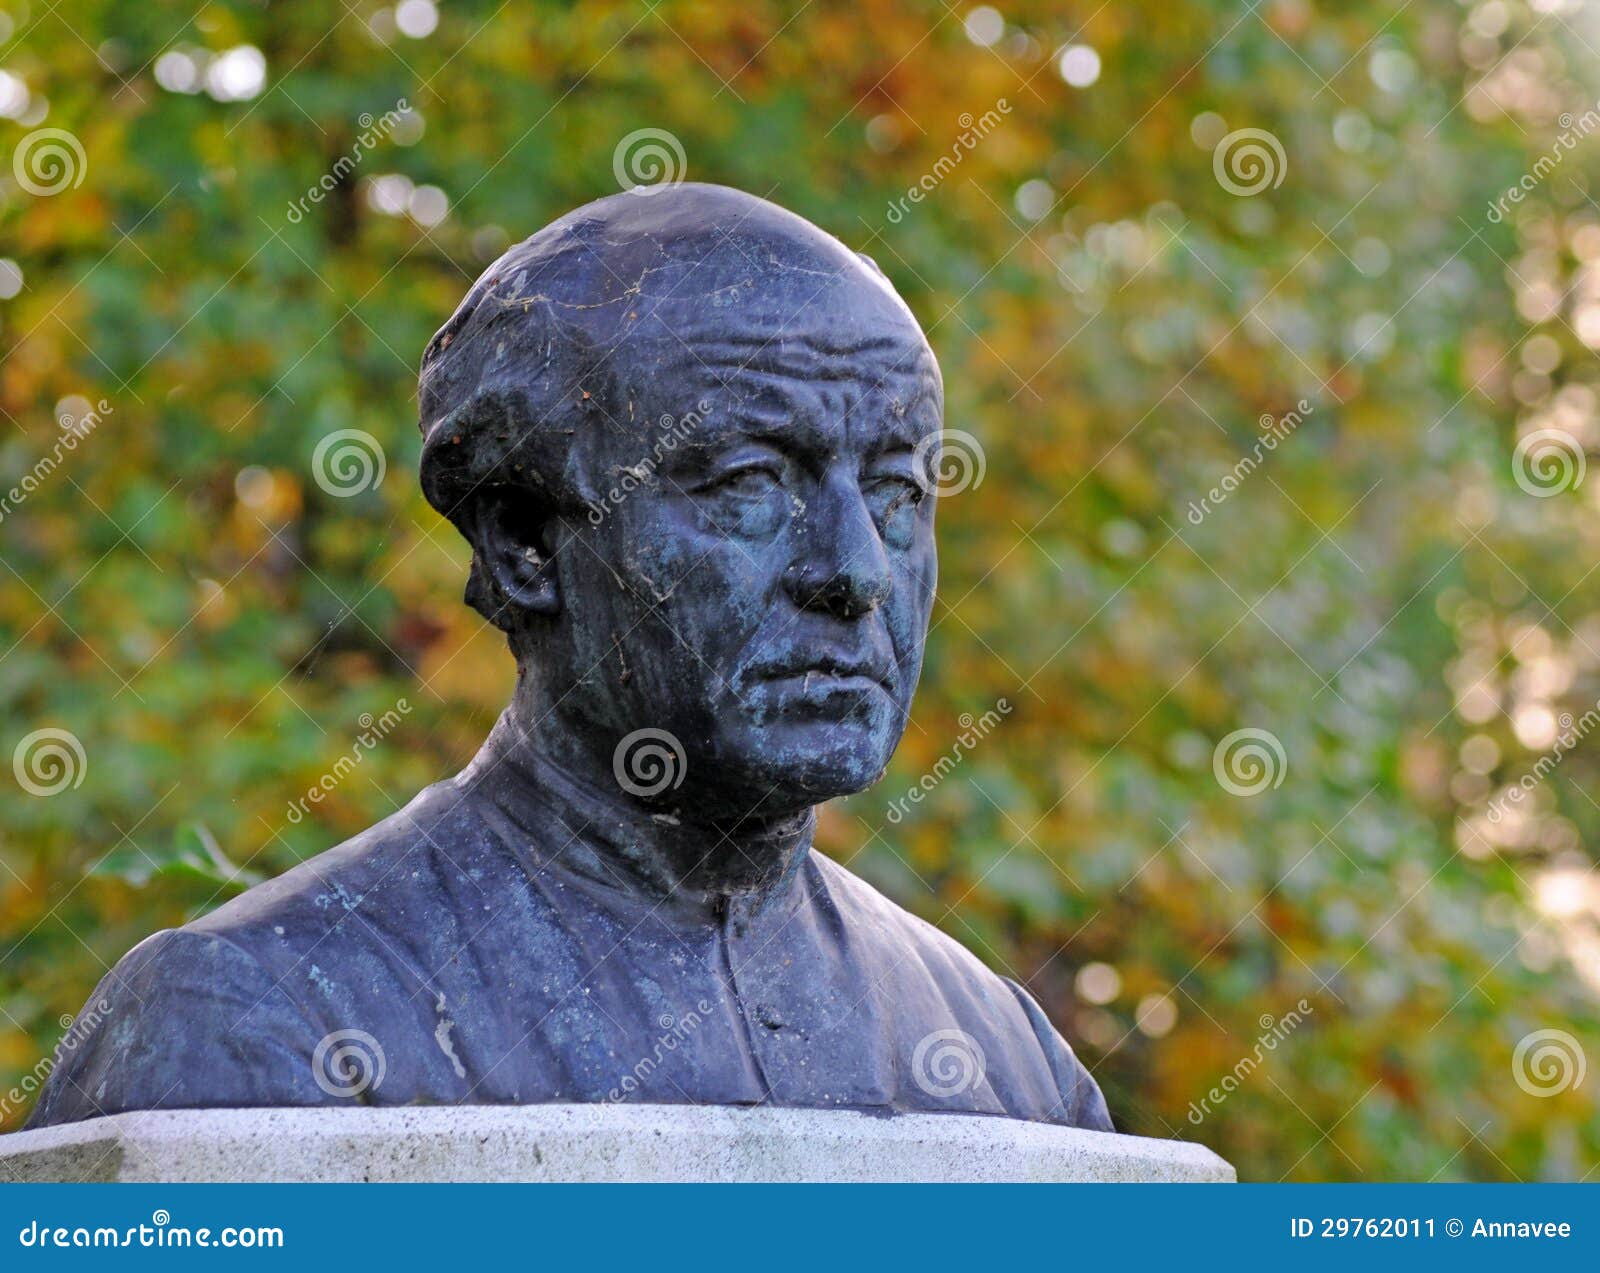 Statue of Guido Gezelle stock image. Image of history - 29762011